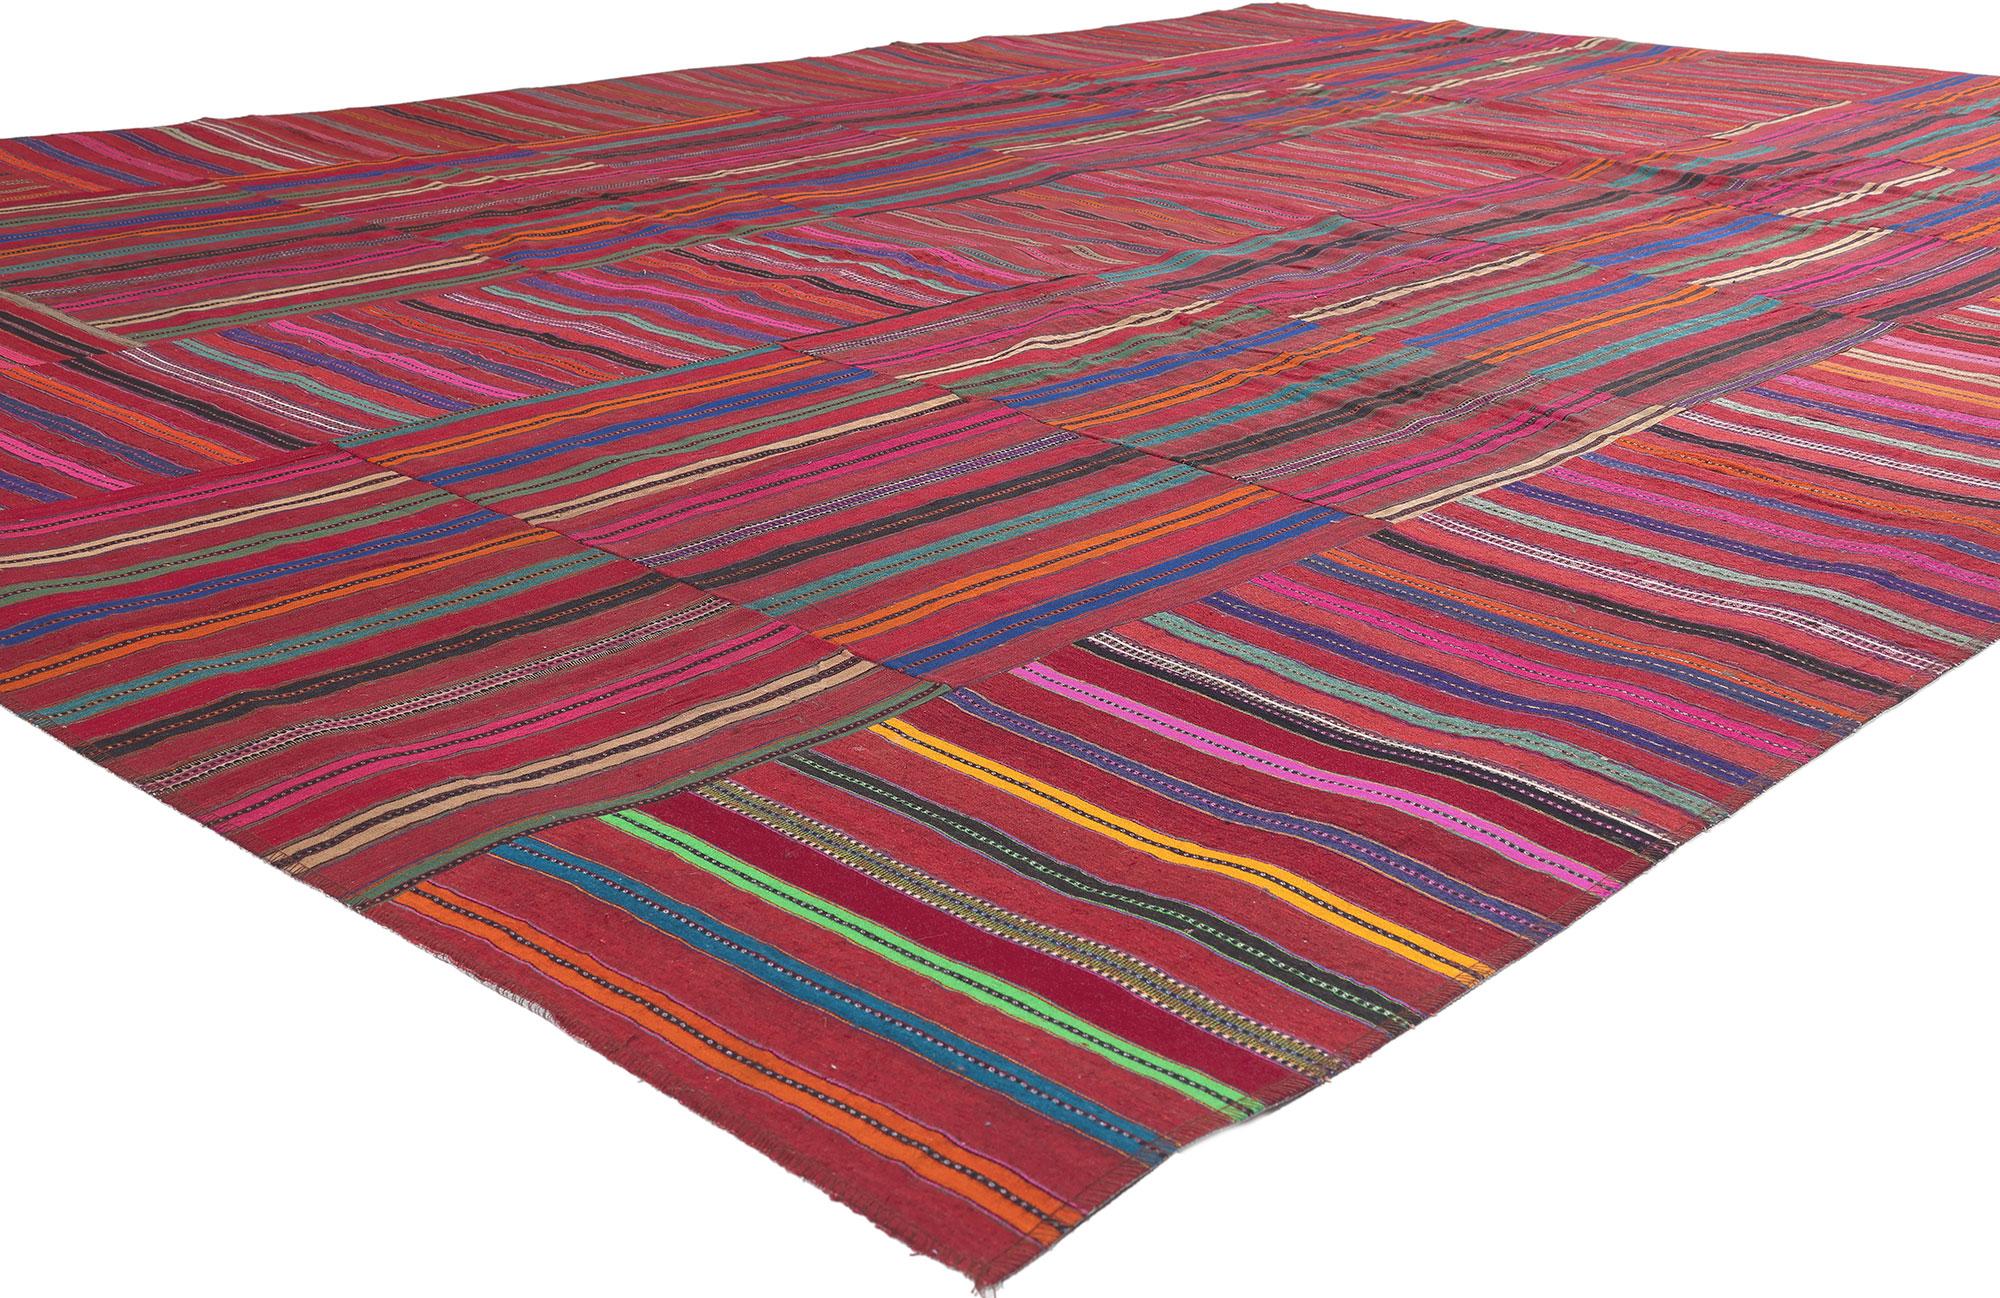 60644 Vintage Turkish Striped Kilim Rug, 09'01 x 12'09.
Rustic sensibility meets rugged beauty in this handwoven wool vintage Turkish kilim rug. The striped colorblock pattern and kaleidoscope of colors woven into this piece work together creating a